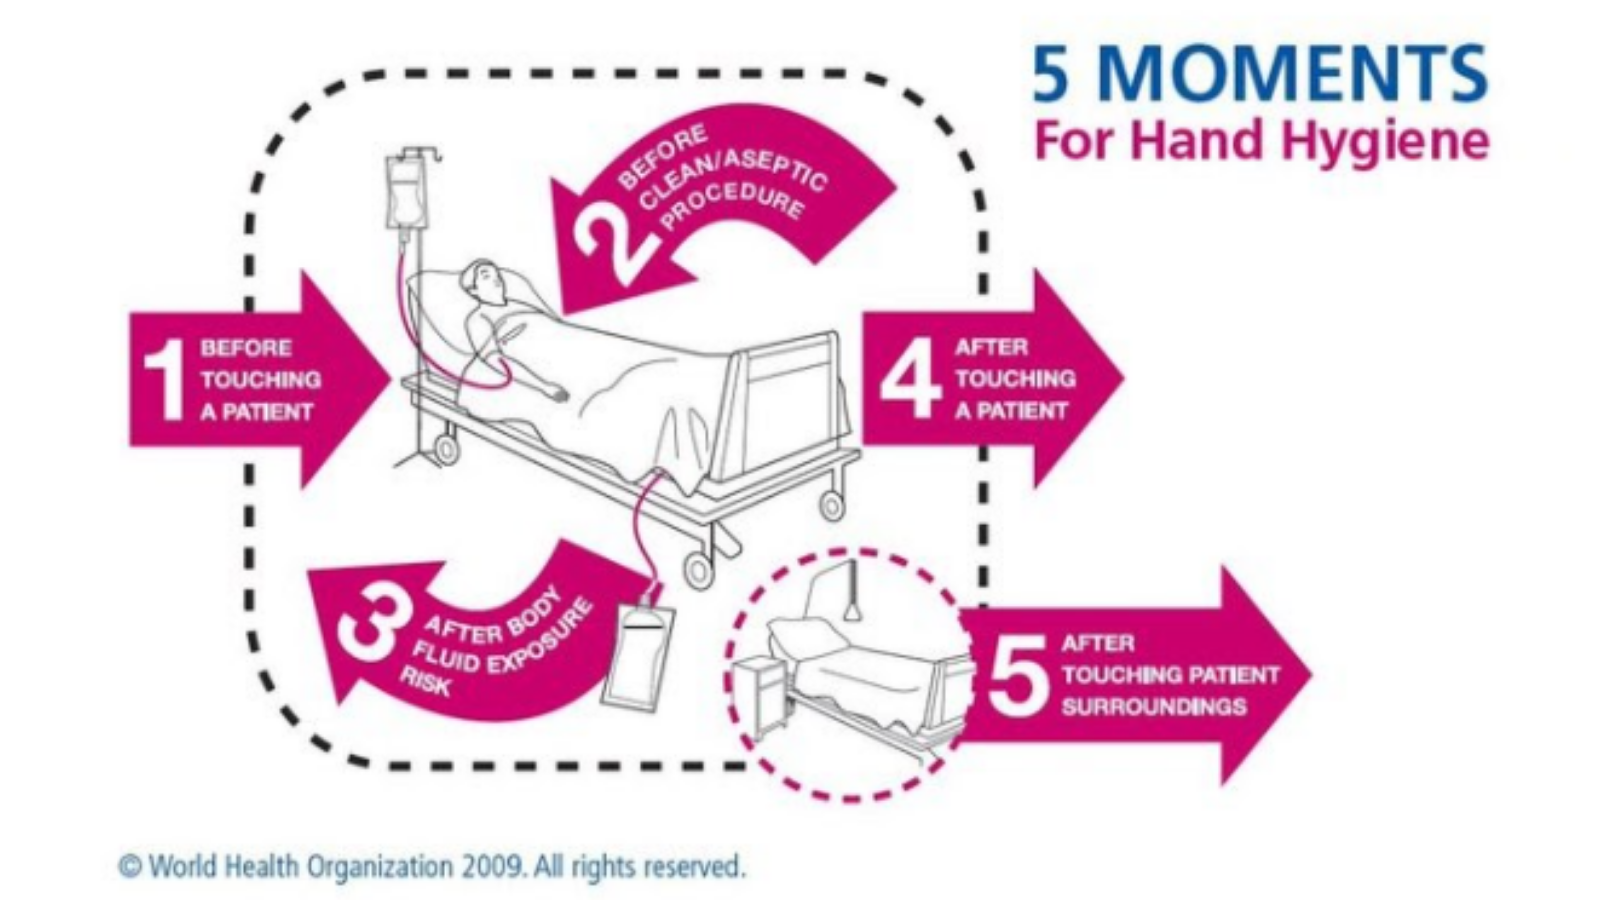 The 5 Moments Of Hand Hygiene